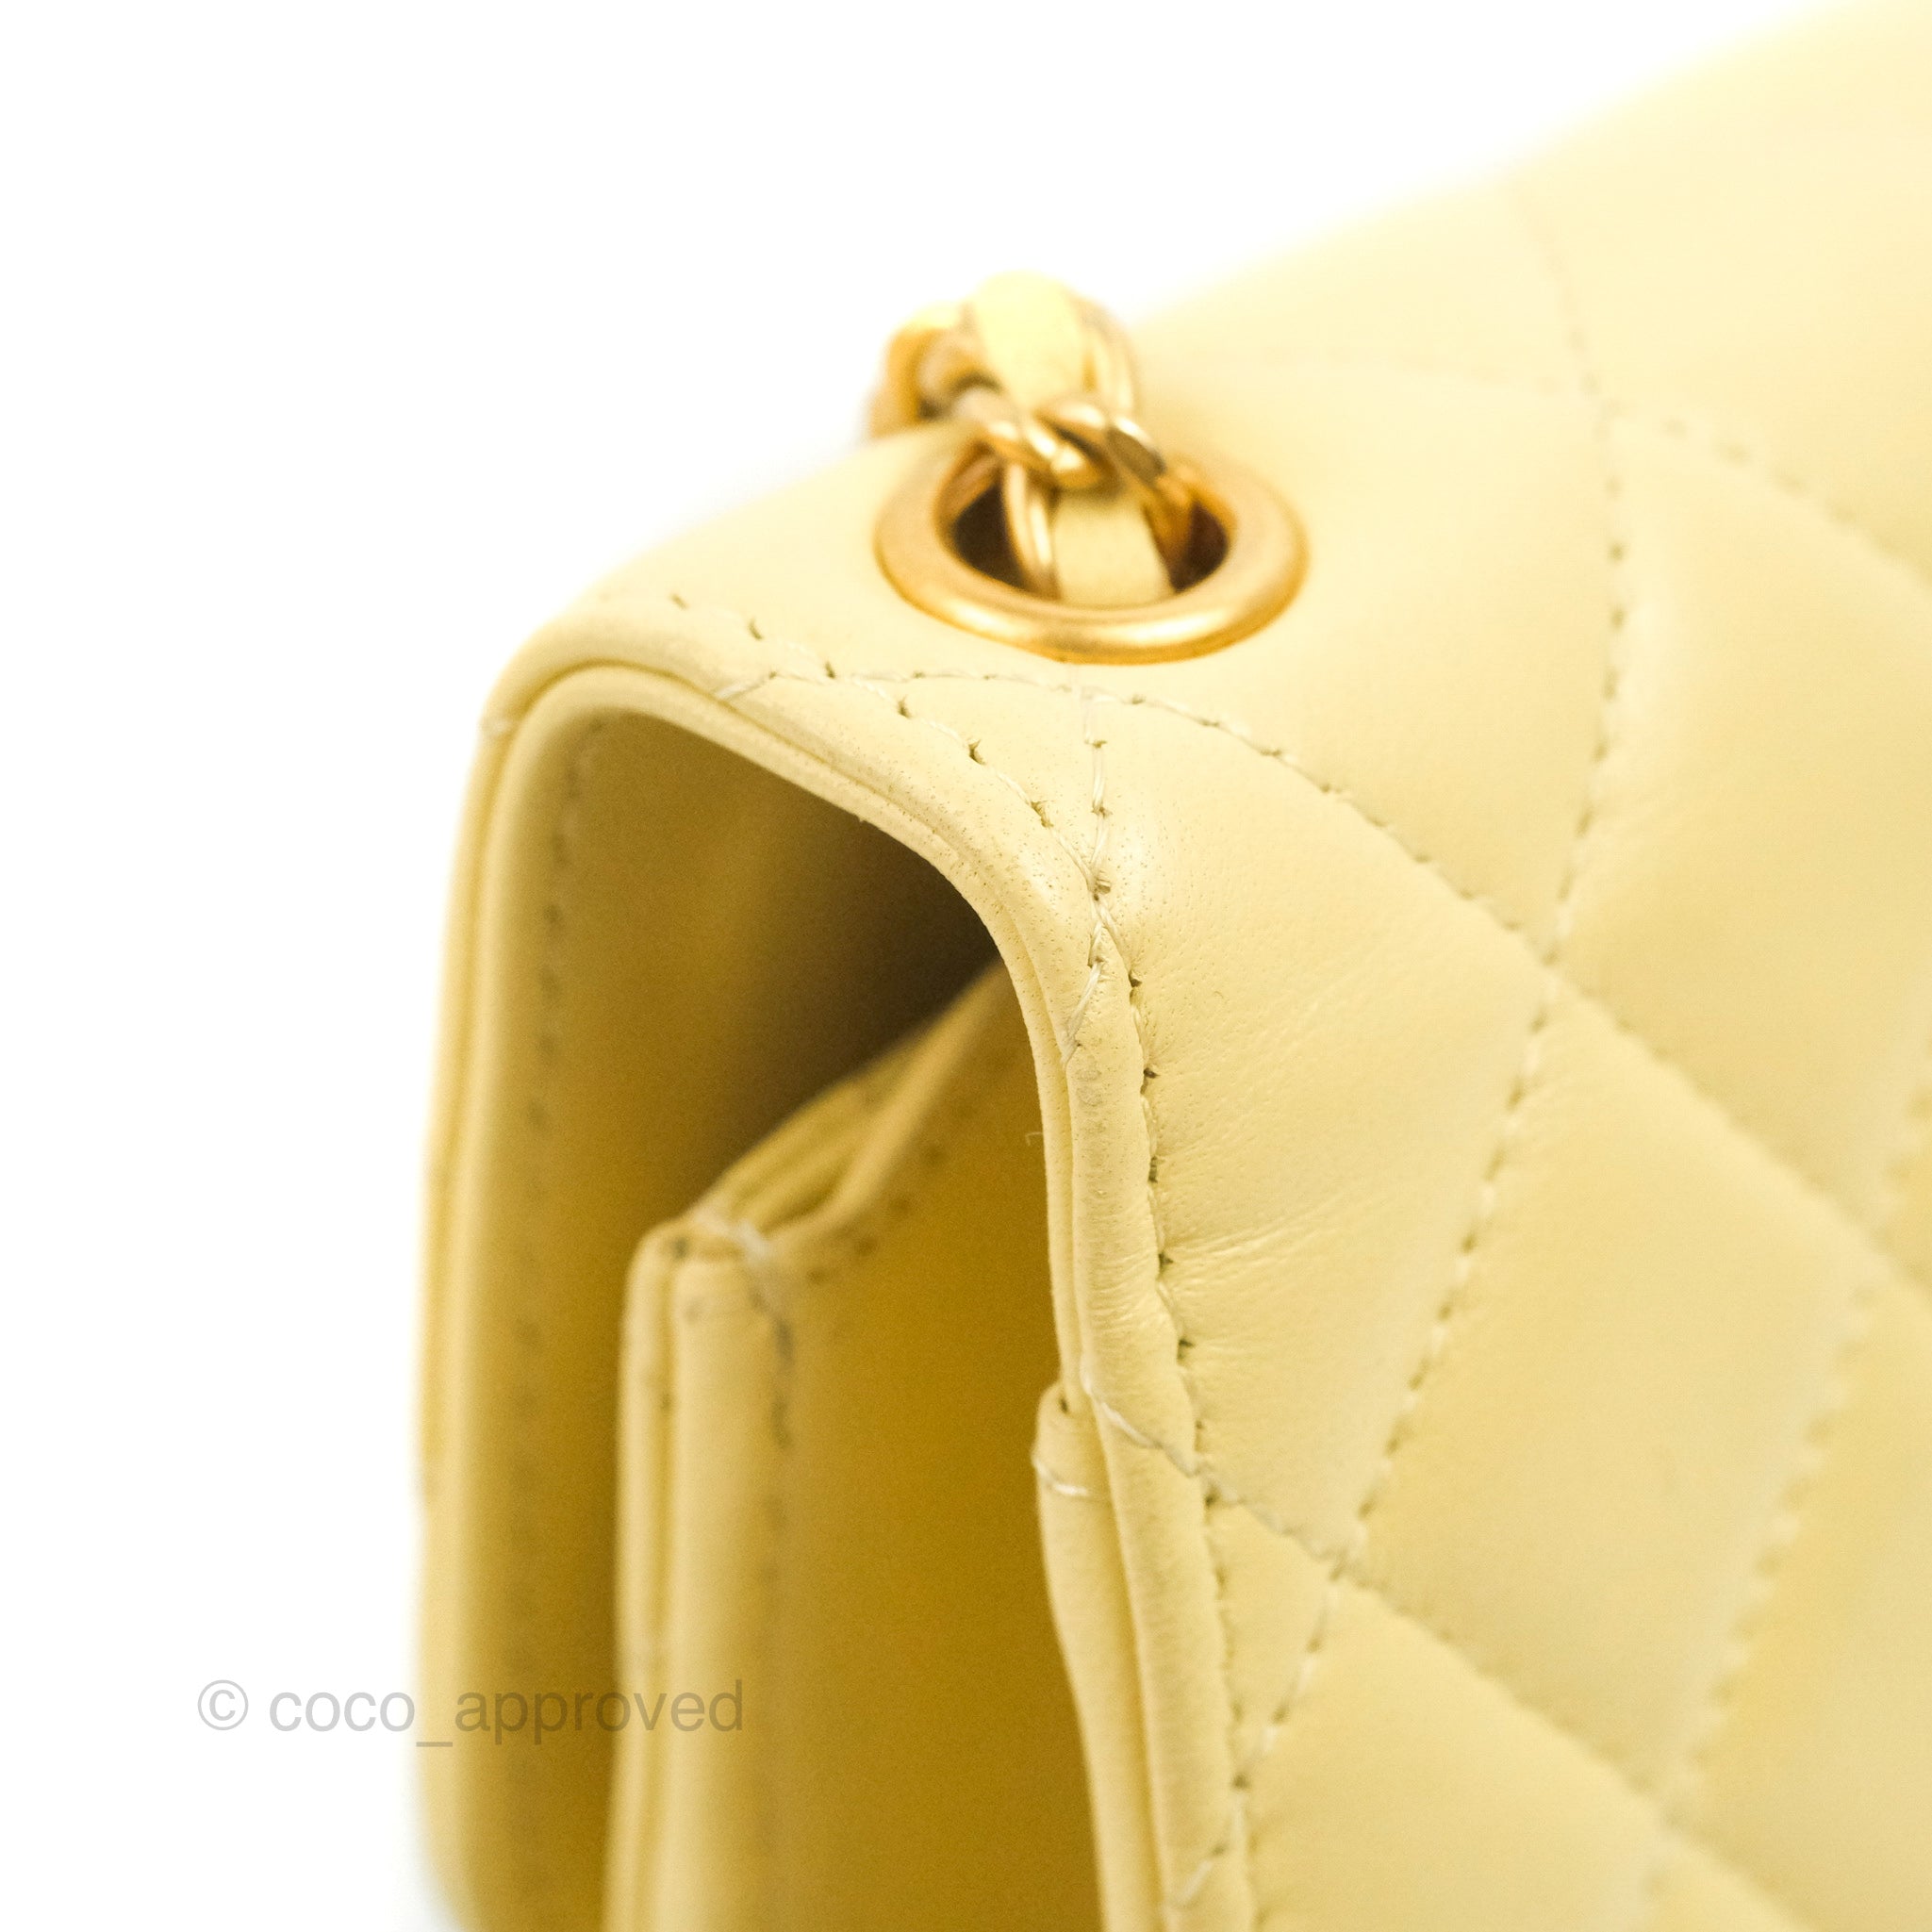 Flap phone holder with chain - Lambskin & gold-tone metal, yellow